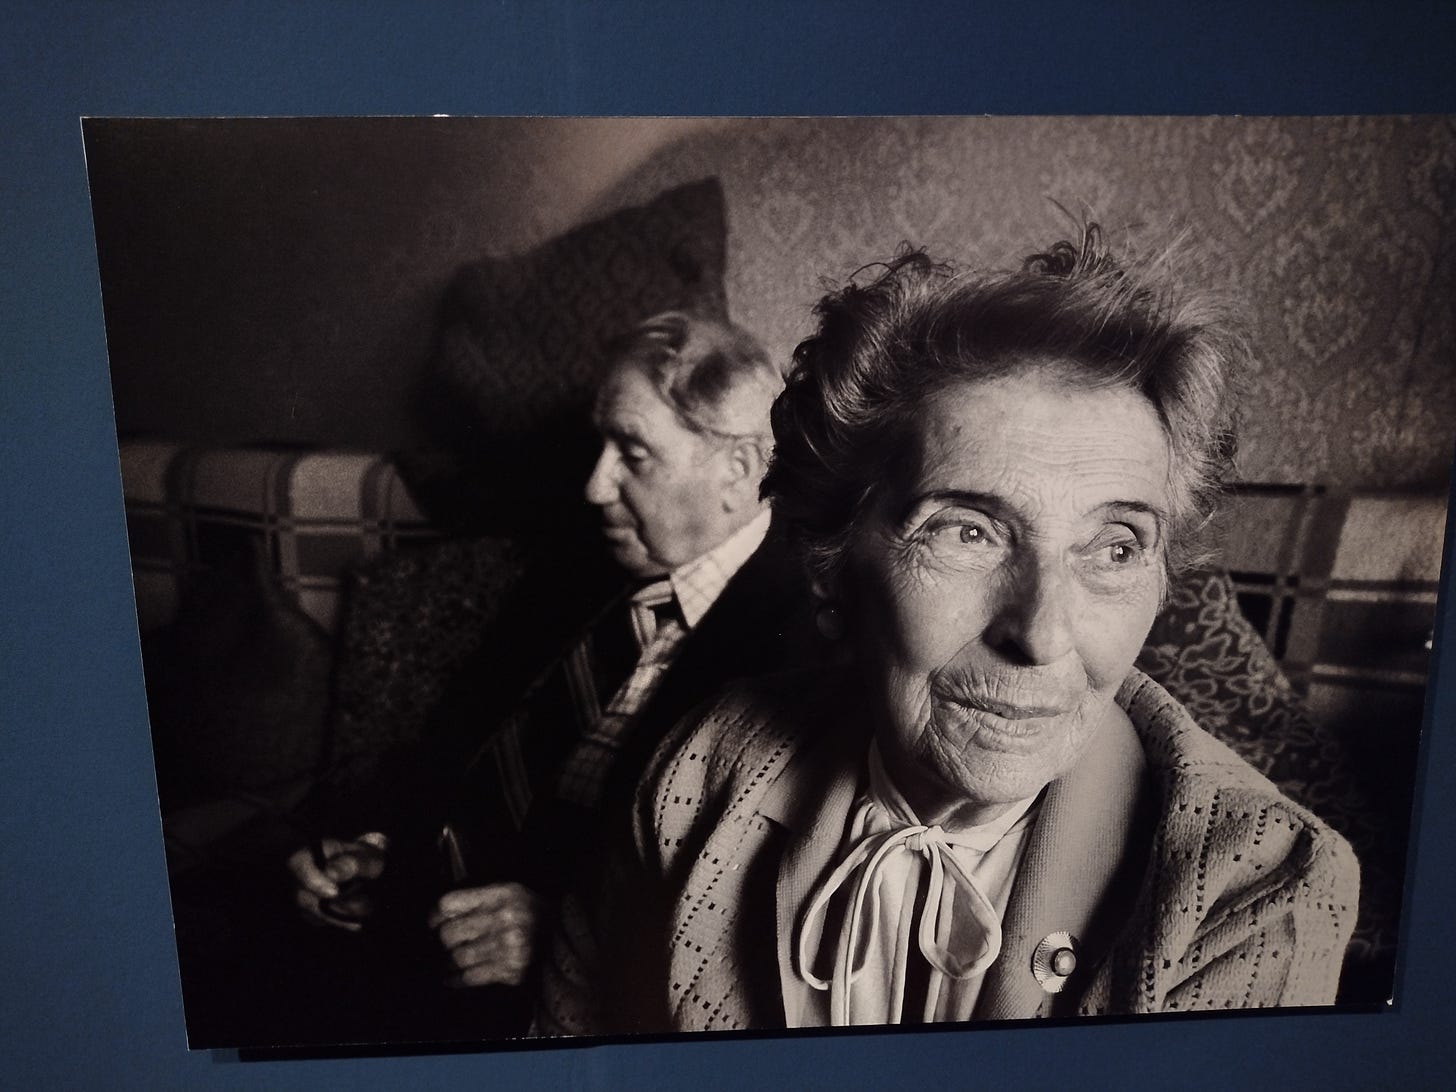 Image of Old Woman with Man in background